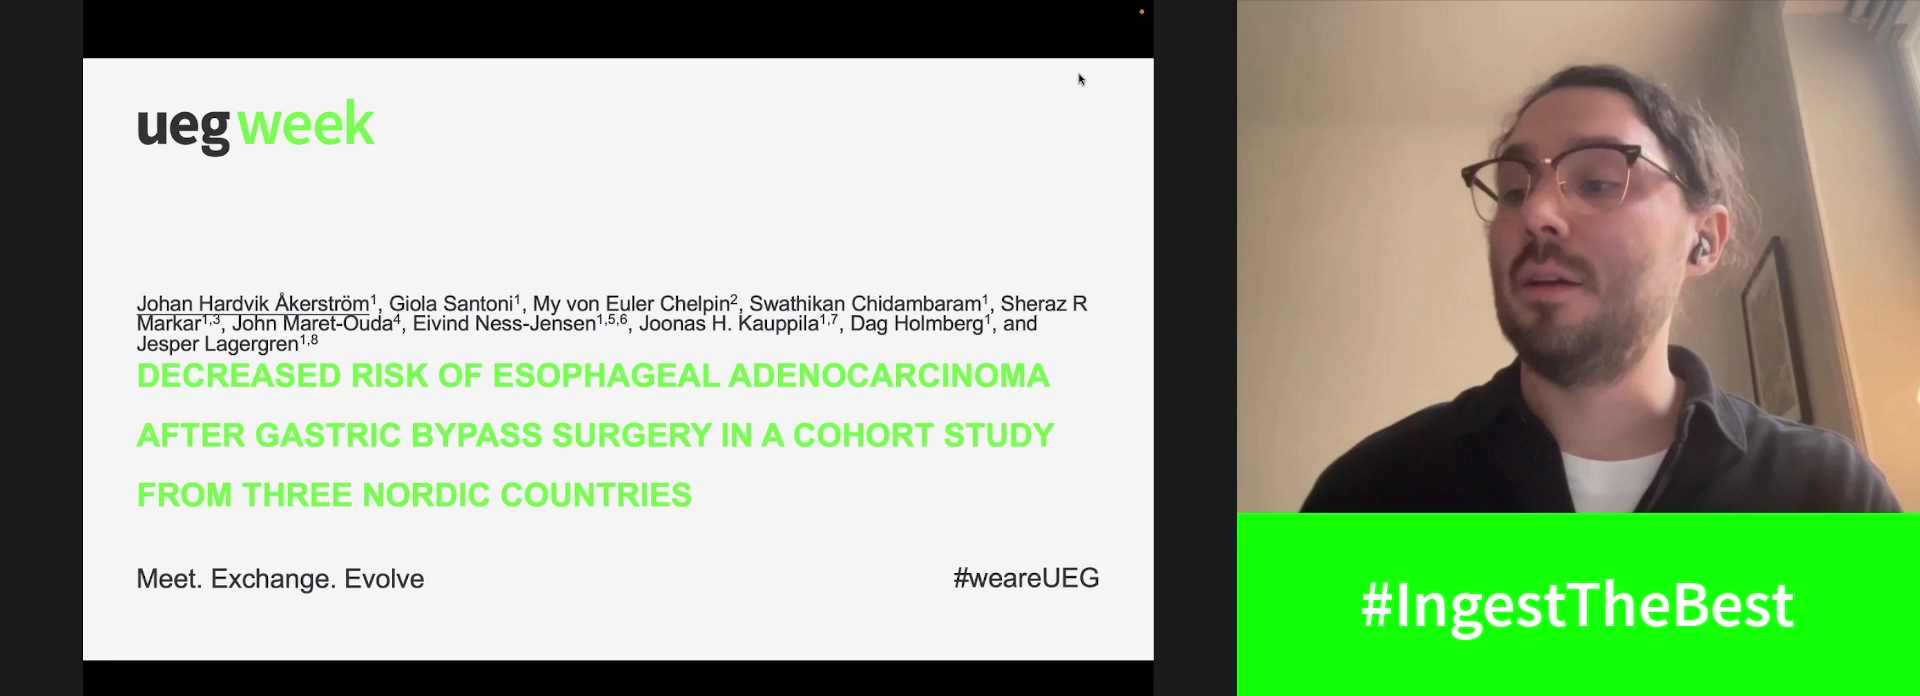 DECREASED RISK OF ESOPHAGEAL ADENOCARCINOMA AFTER GASTRIC BYPASS SURGERY IN A COHORT STUDY FROM THREE NORDIC COUNTRIES